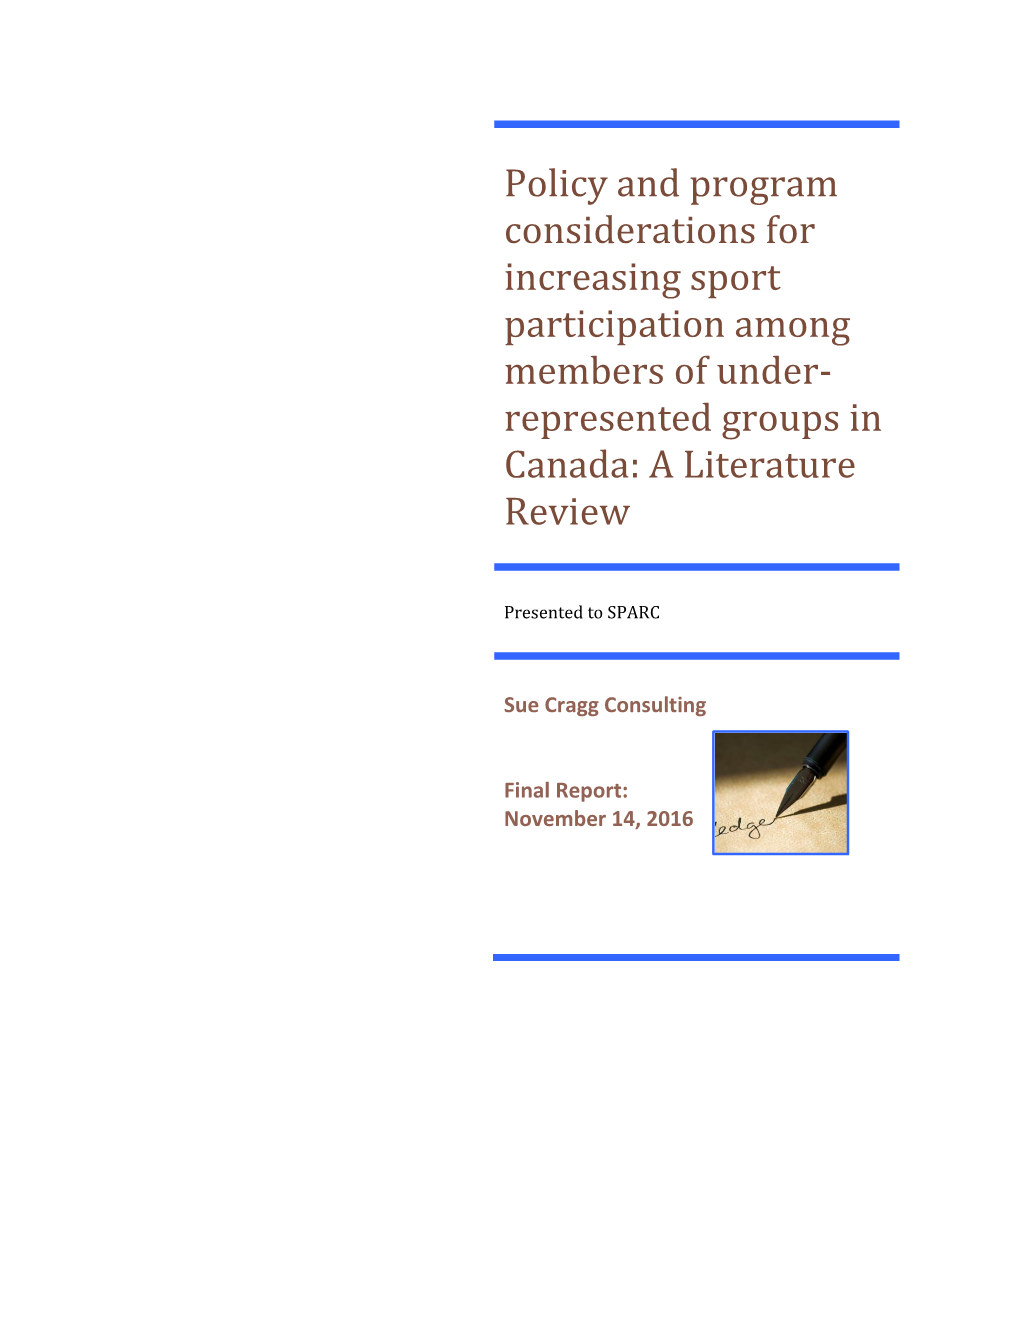 Policy and Program Considerations for Increasing Sport Participation Among Members of Under- Represented Groups in Canada: a Literature Review